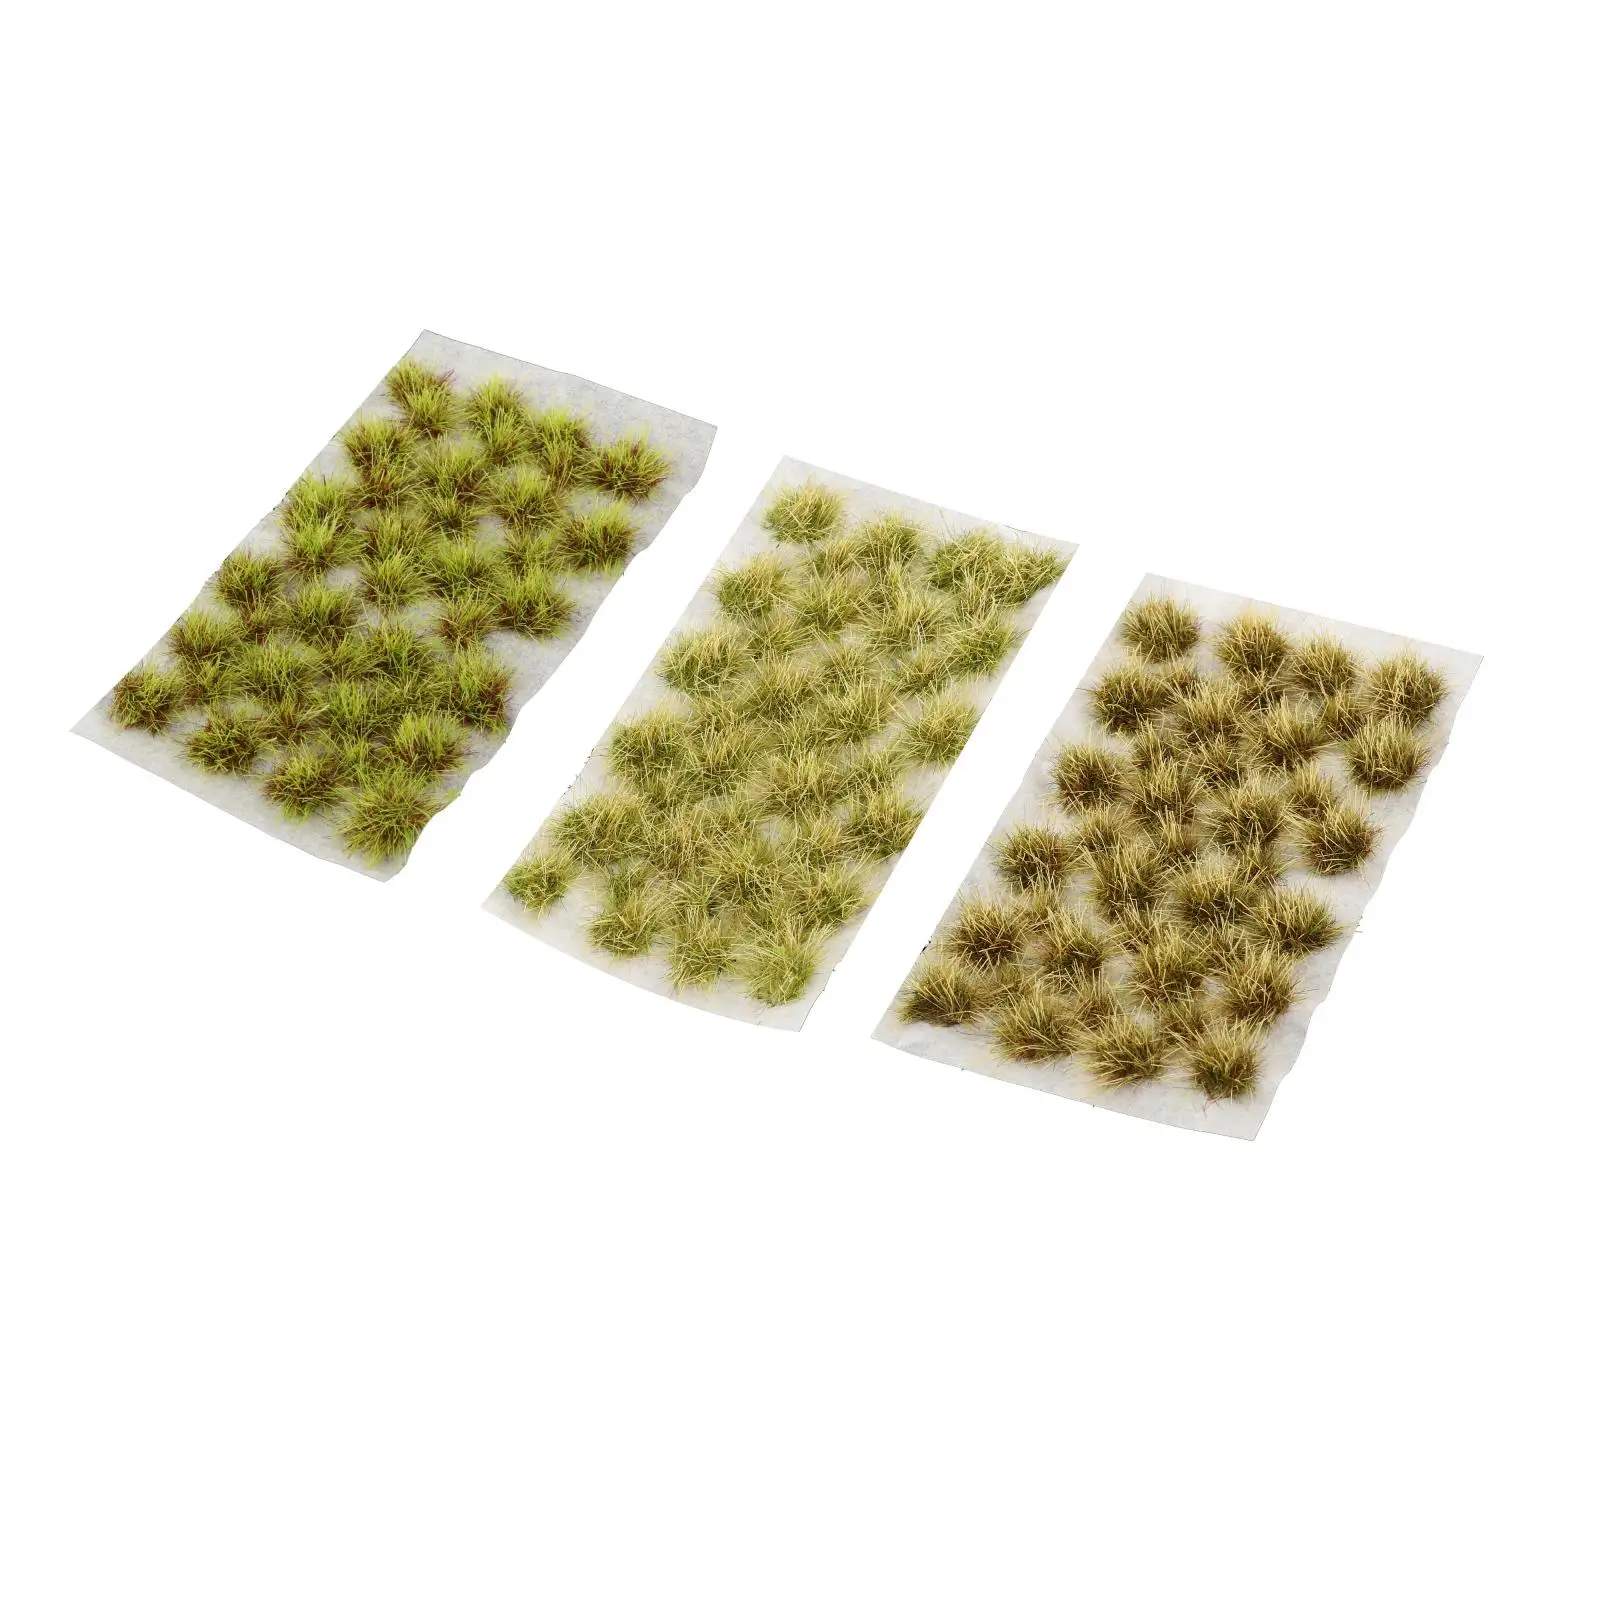 

39 Pieces Static Grass Tuft 11 mm,Self Adhesive Static Grass,Railway Artificial Grass Modeling Wargaming Terrain Model Diorama